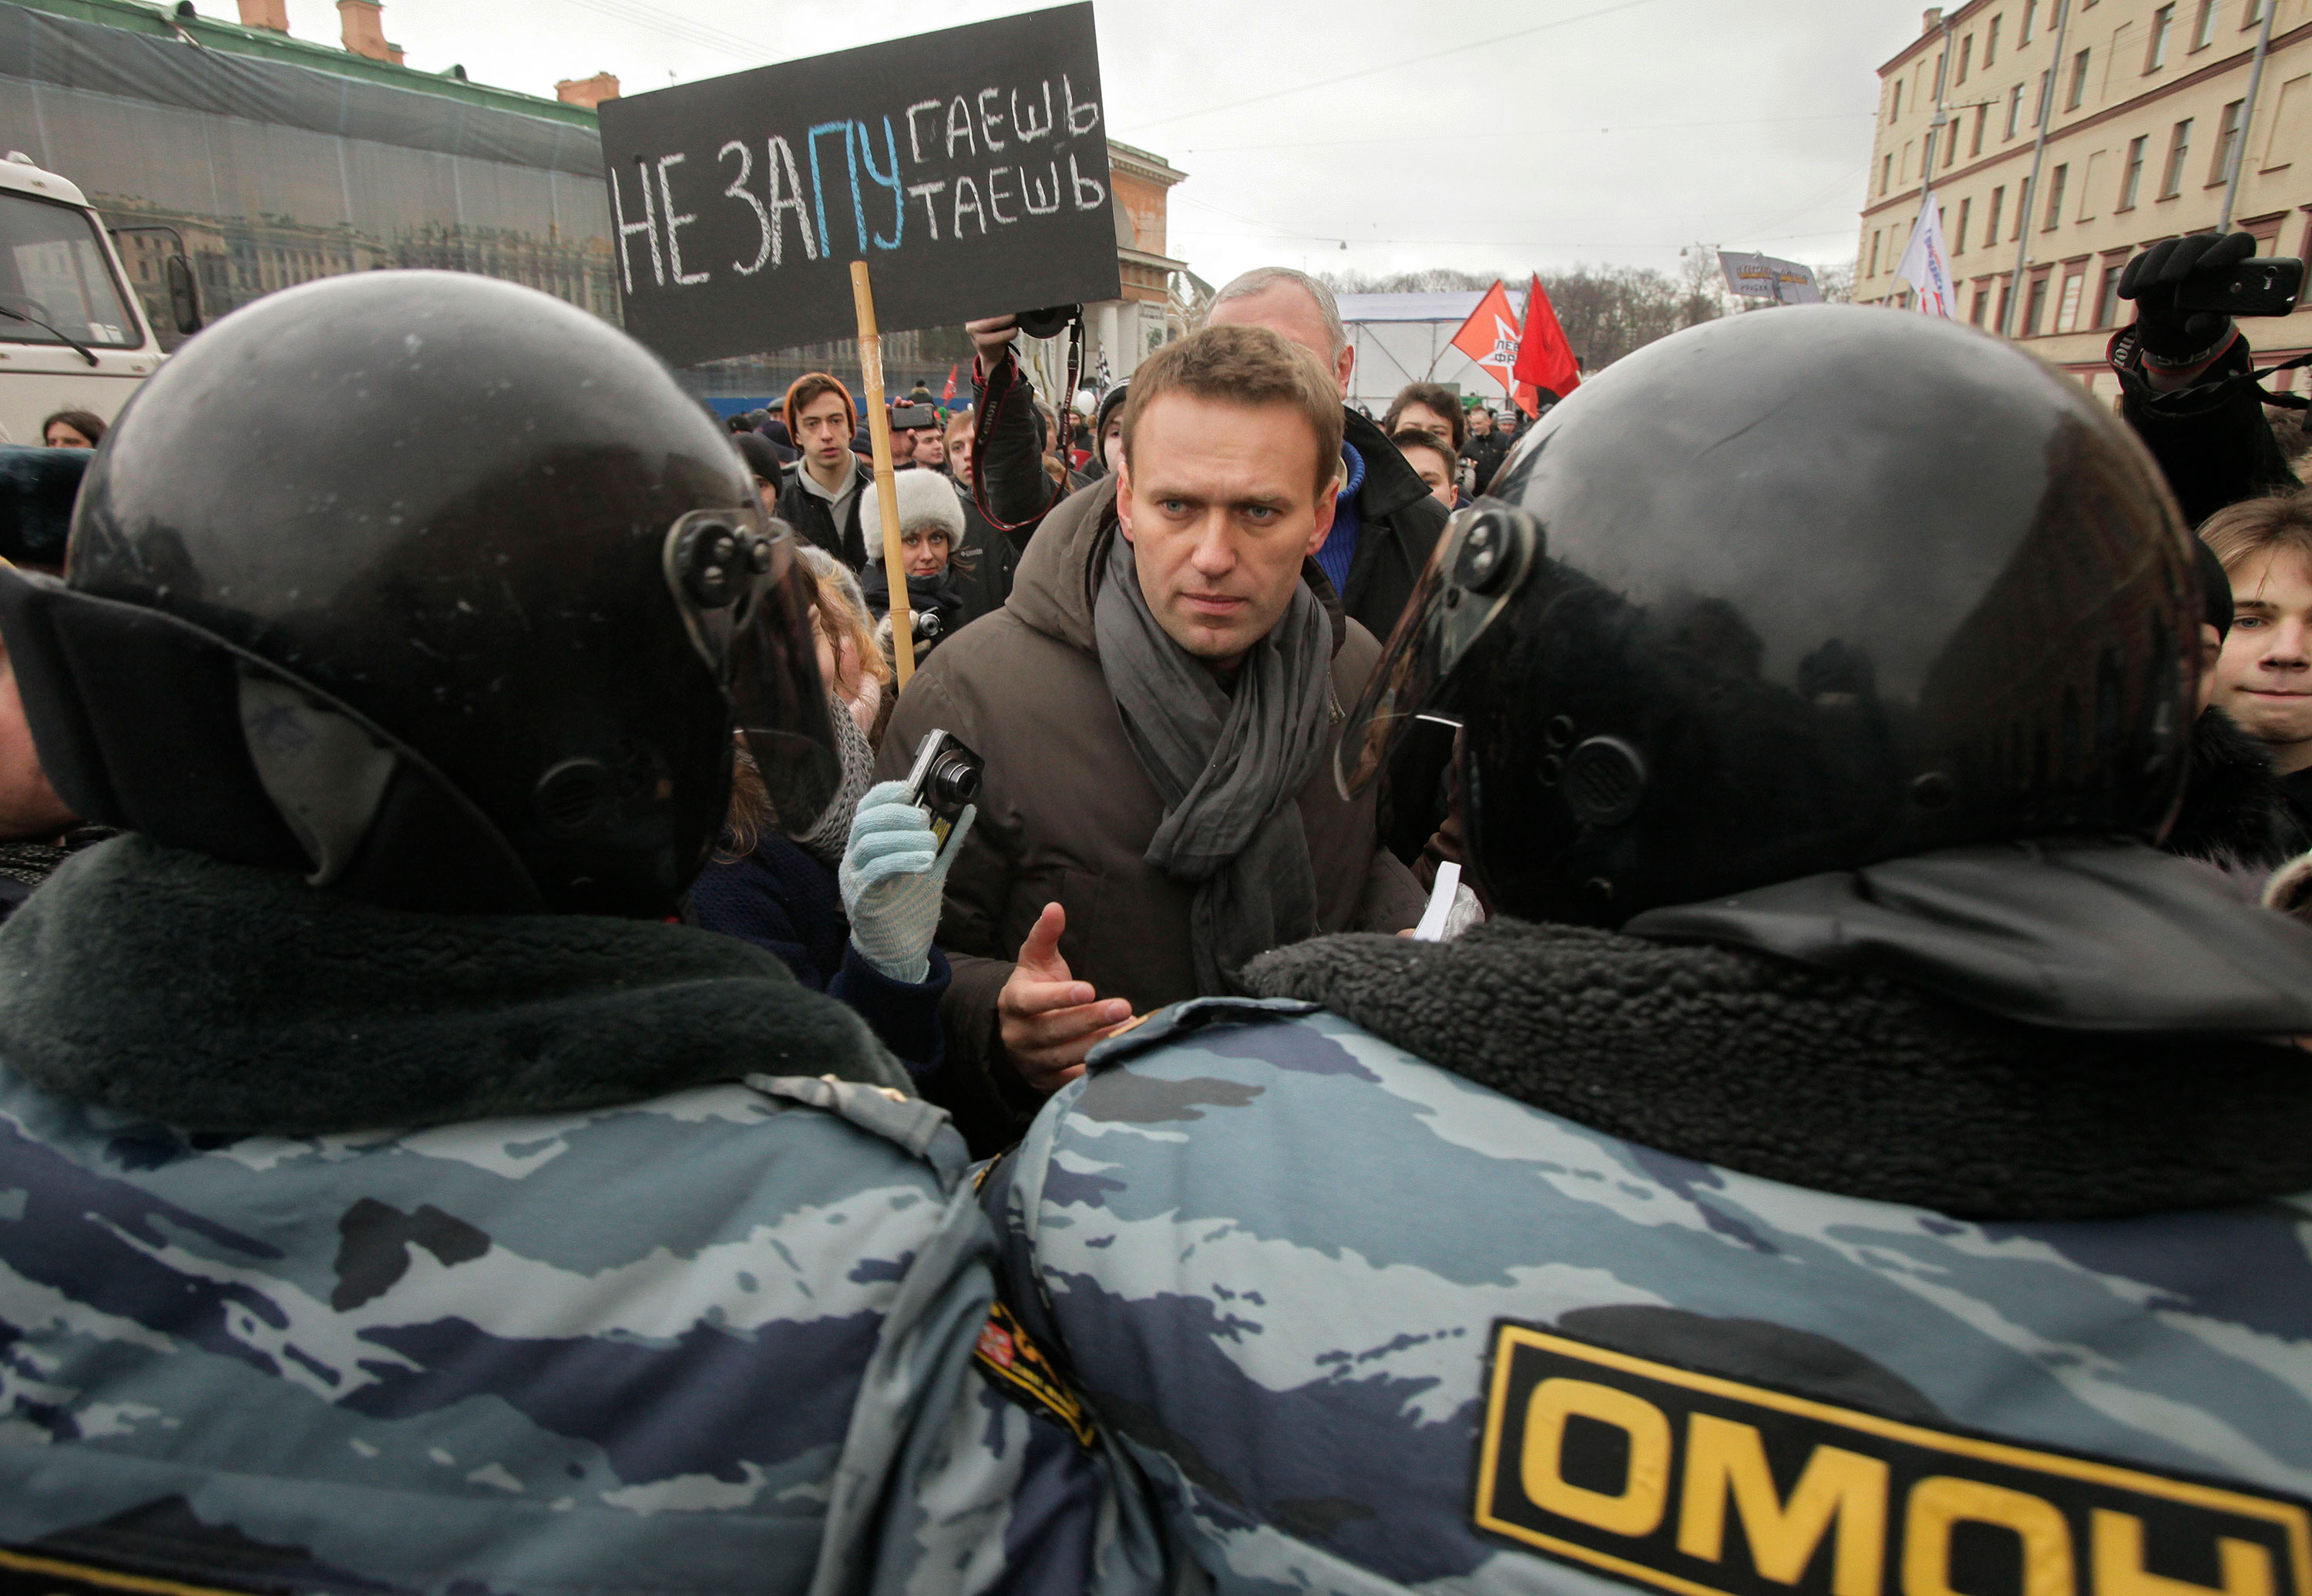 Alexey Navalny speaks with riot police officers blocking the way during a massive protest rally against Prime Minister Vladimir Putin's rule in St. Petersburg, Russia, in 2012.